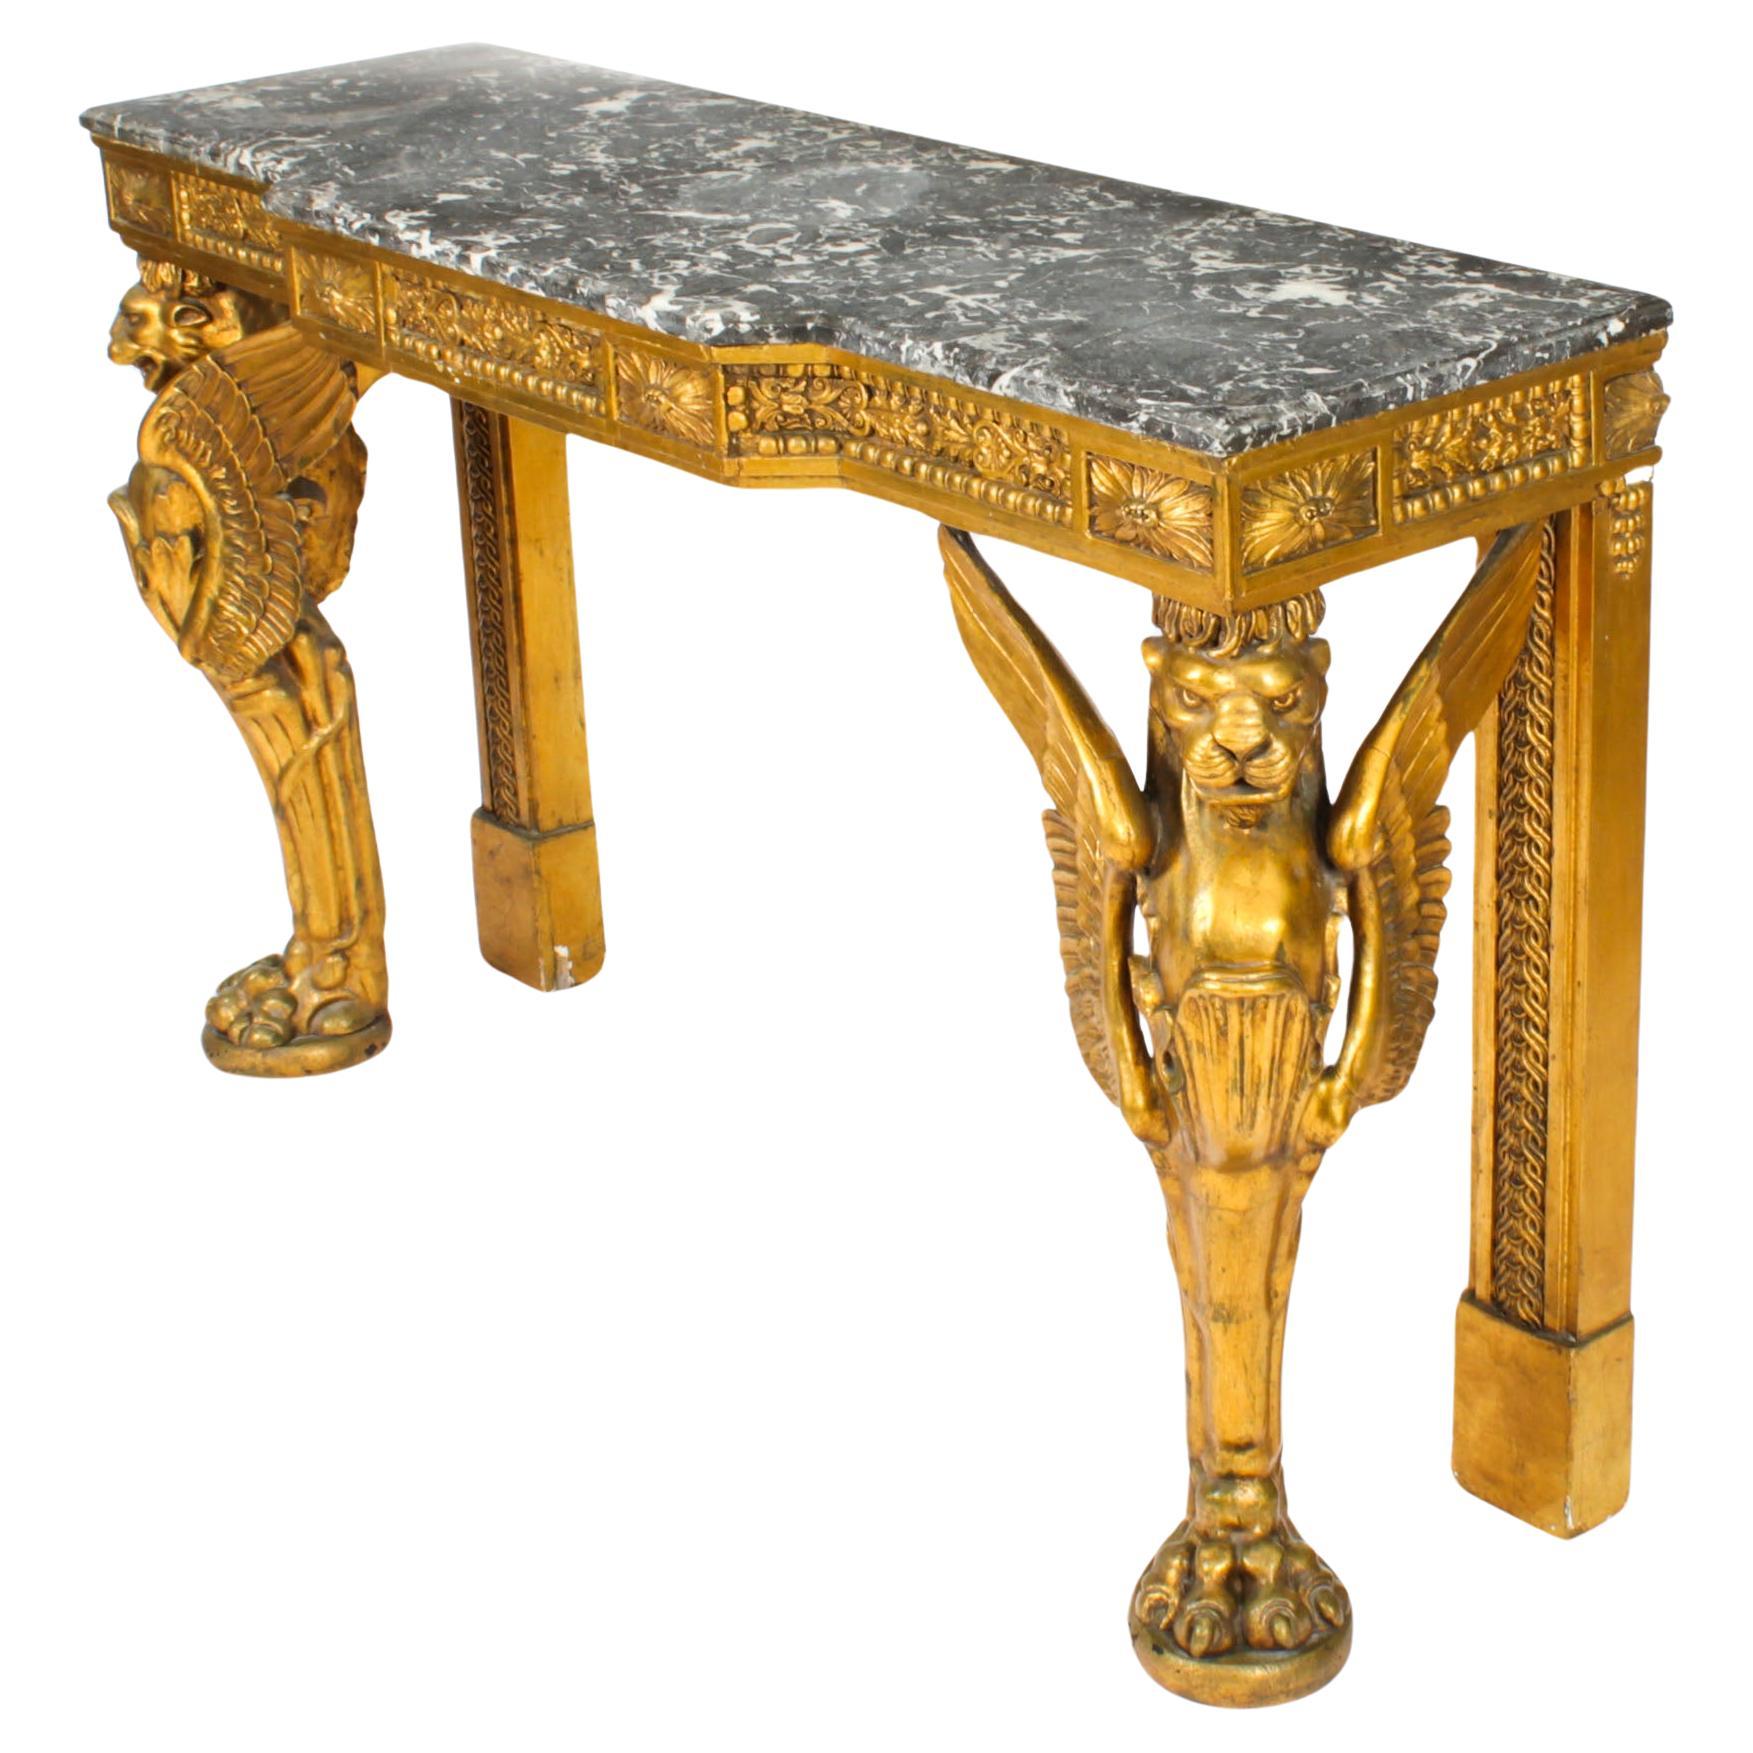 Antique French Neo-Classical Gilded & Marble Top Console Table 1820s